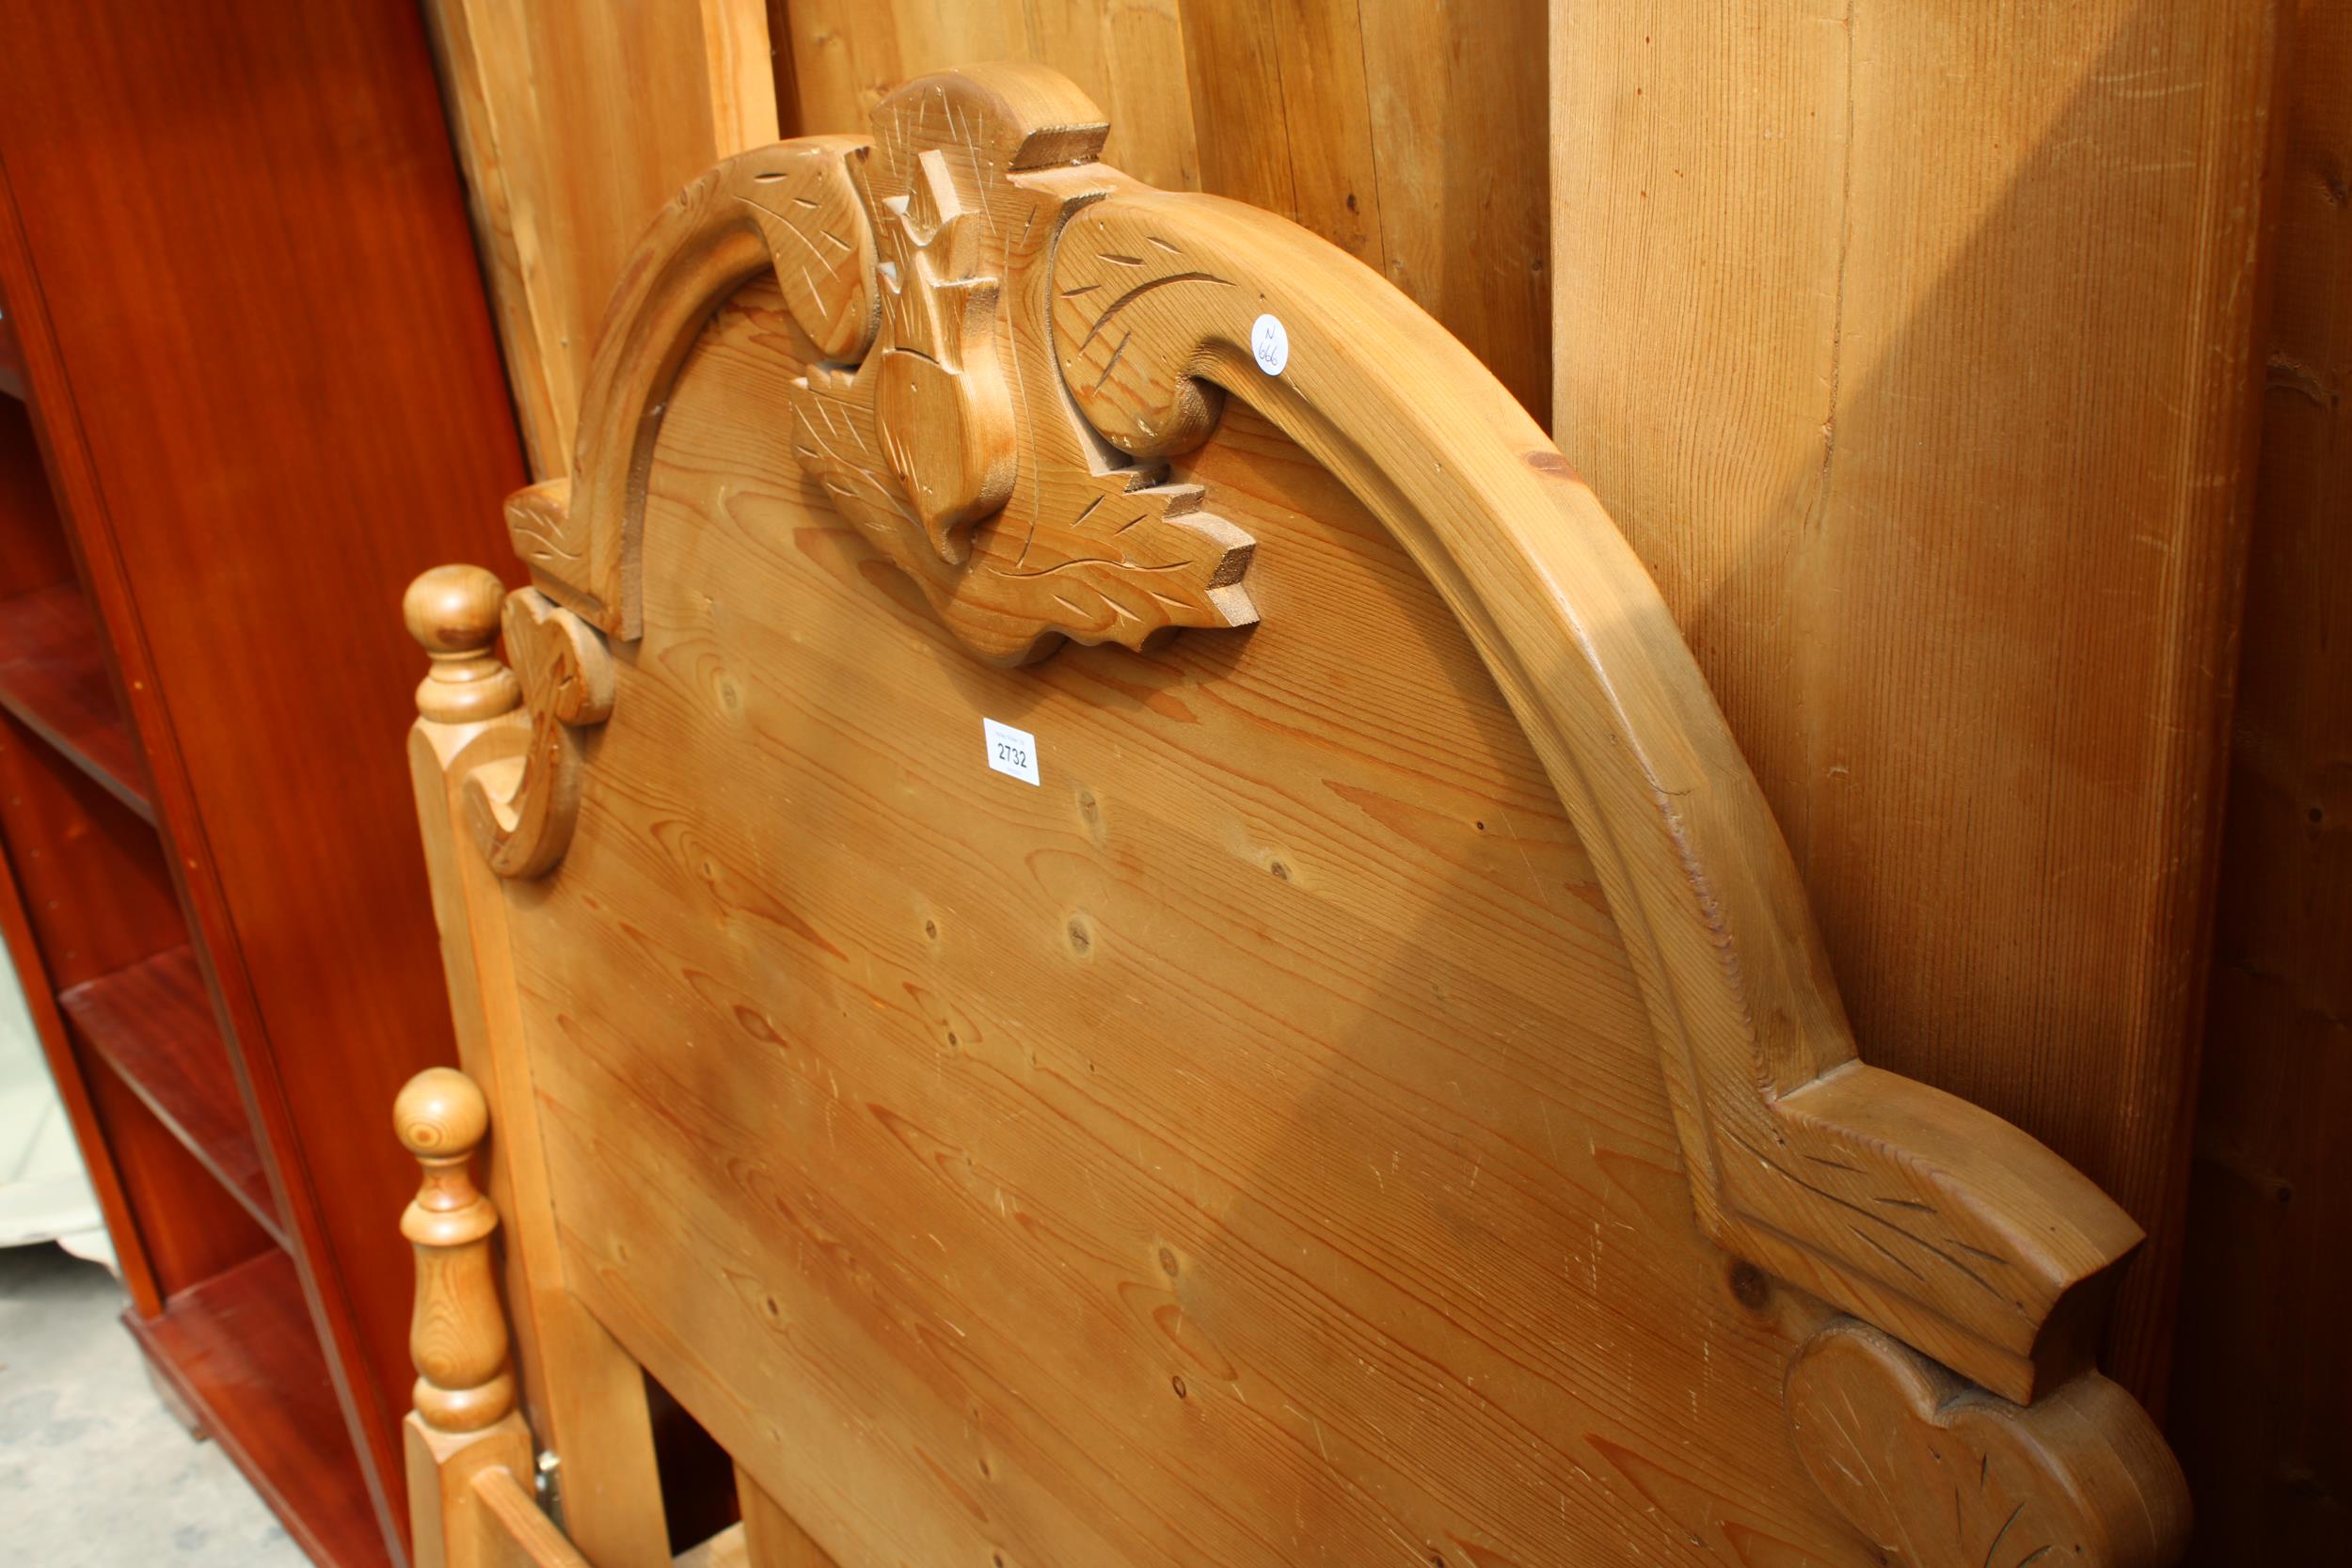 A VICTORIAN STYLE PINE 4'6" BEDSTEAD - Image 2 of 3